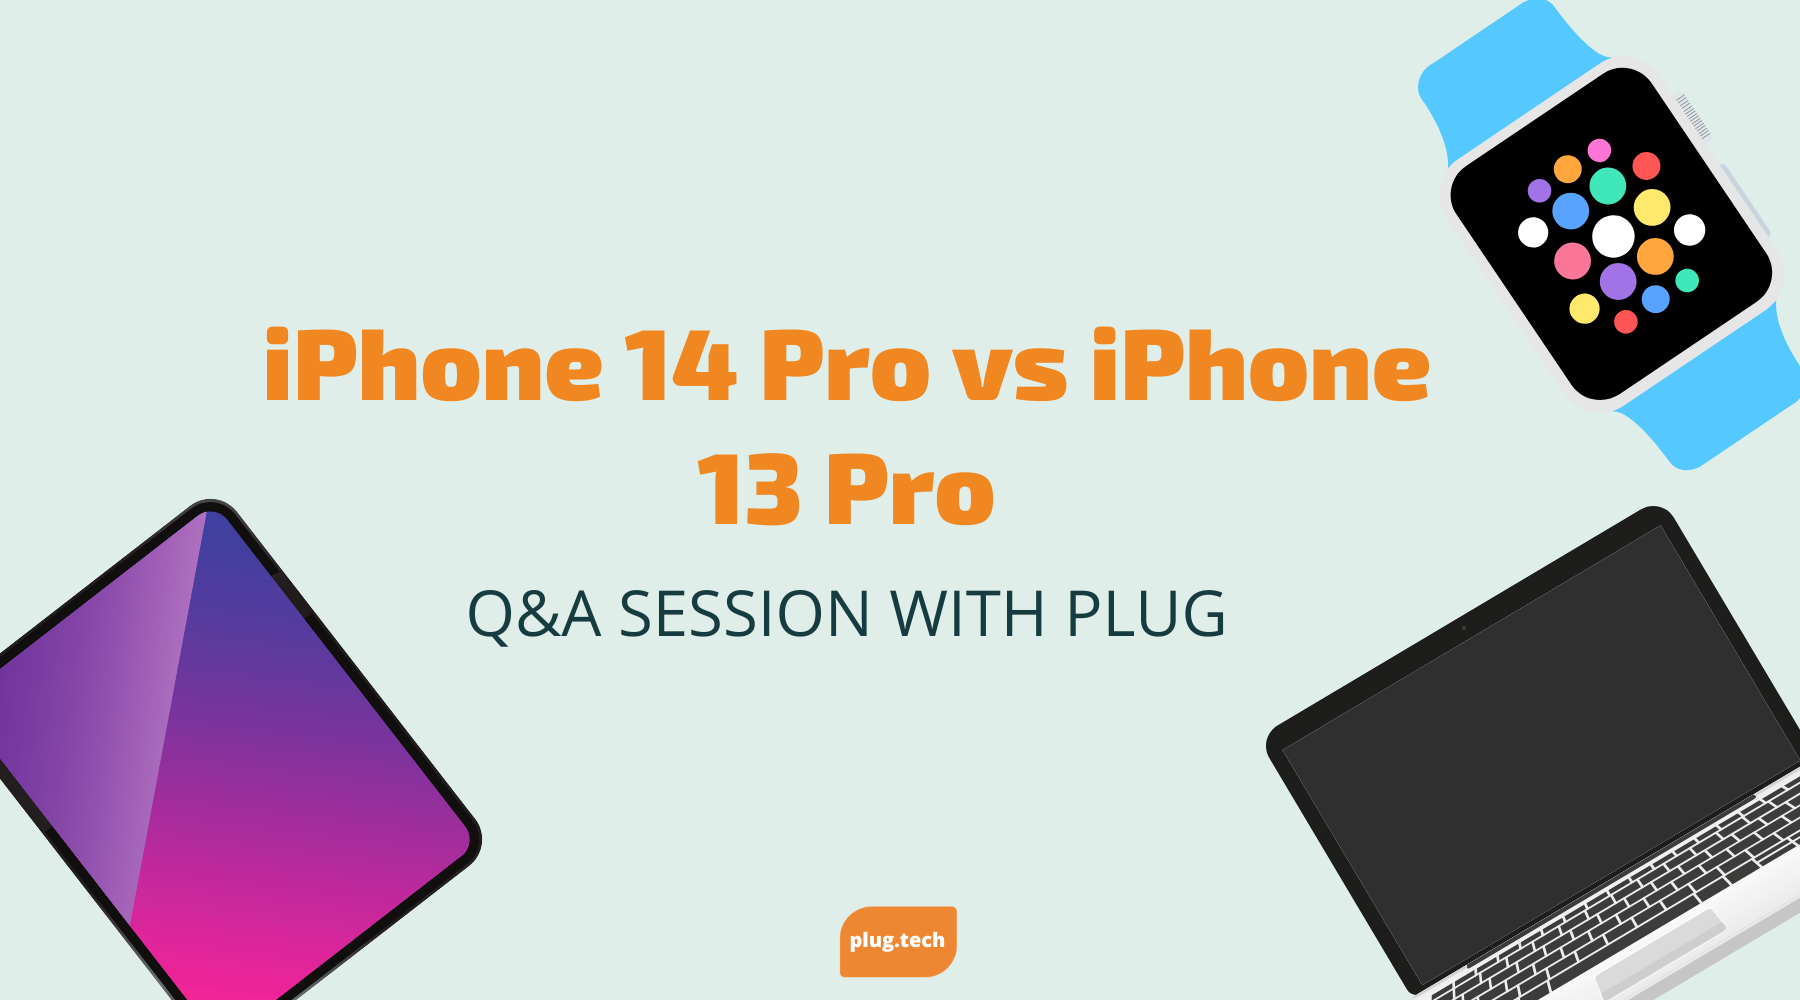 iPhone 14 Pro vs iPhone 13 Pro, What's the difference?